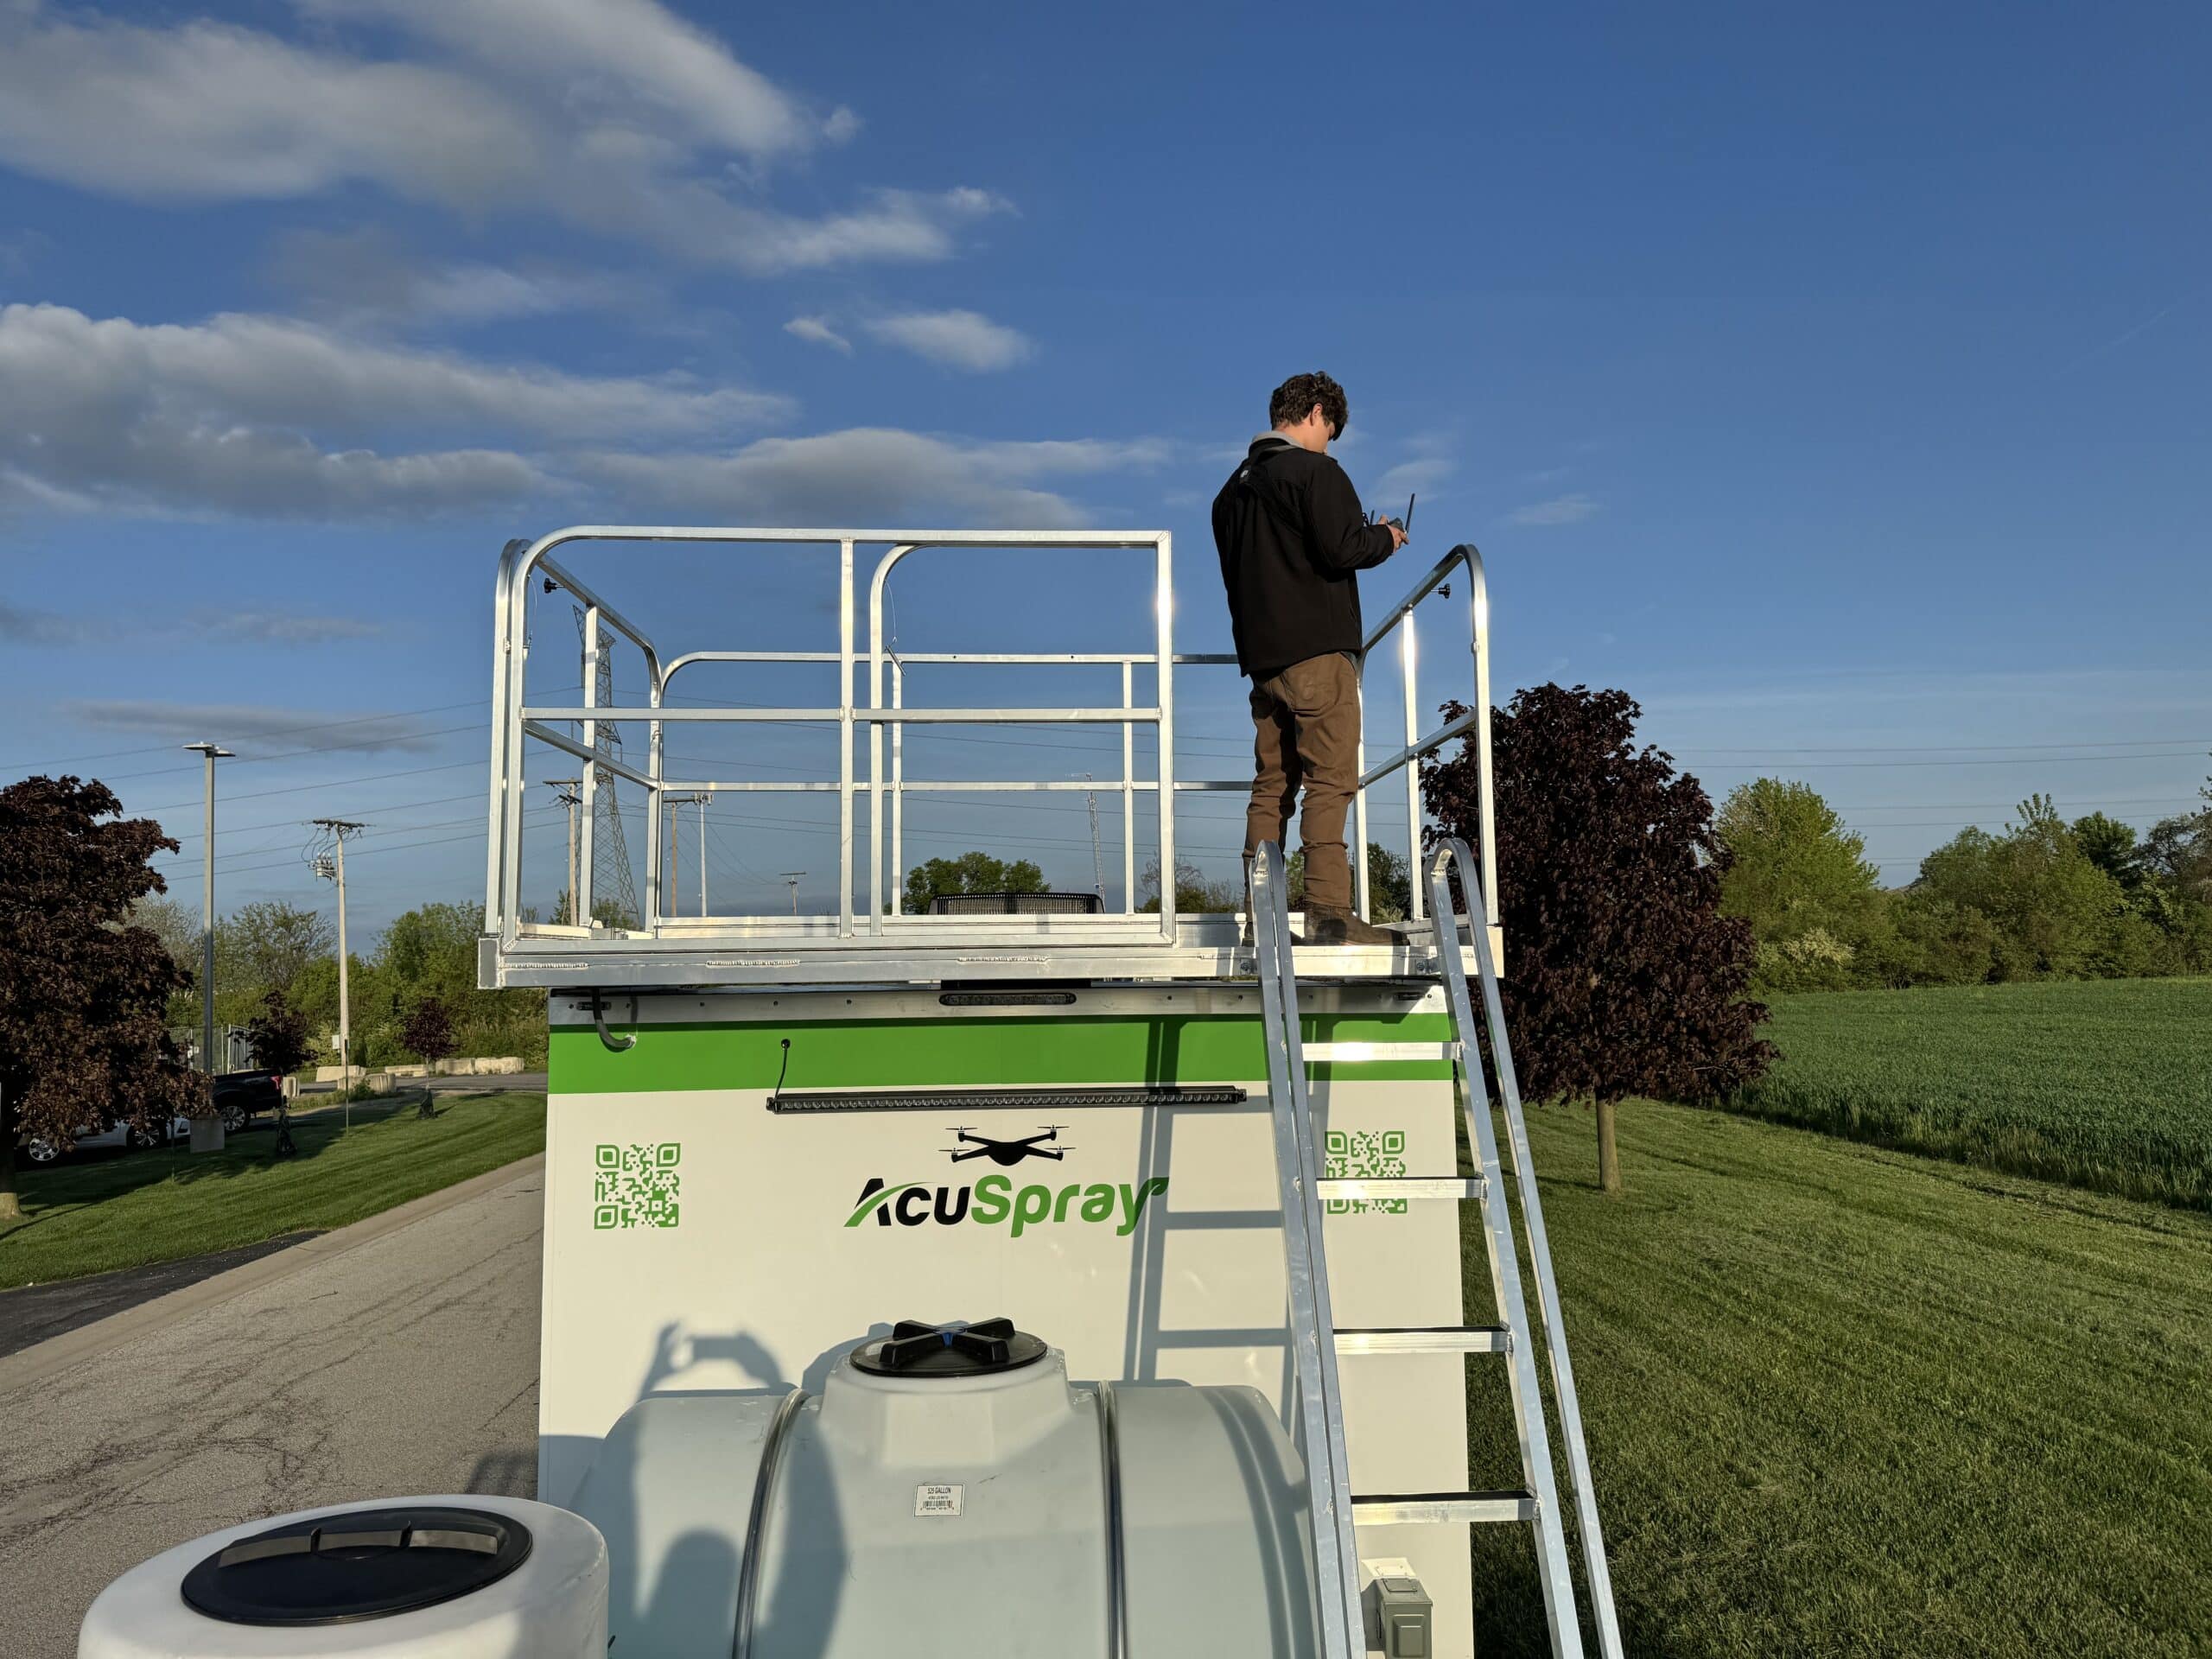 A technician stands on top of an AcuSpray trailer, setting up drone equipment for advanced golf course management, focusing on precise turf care and efficient resource use.